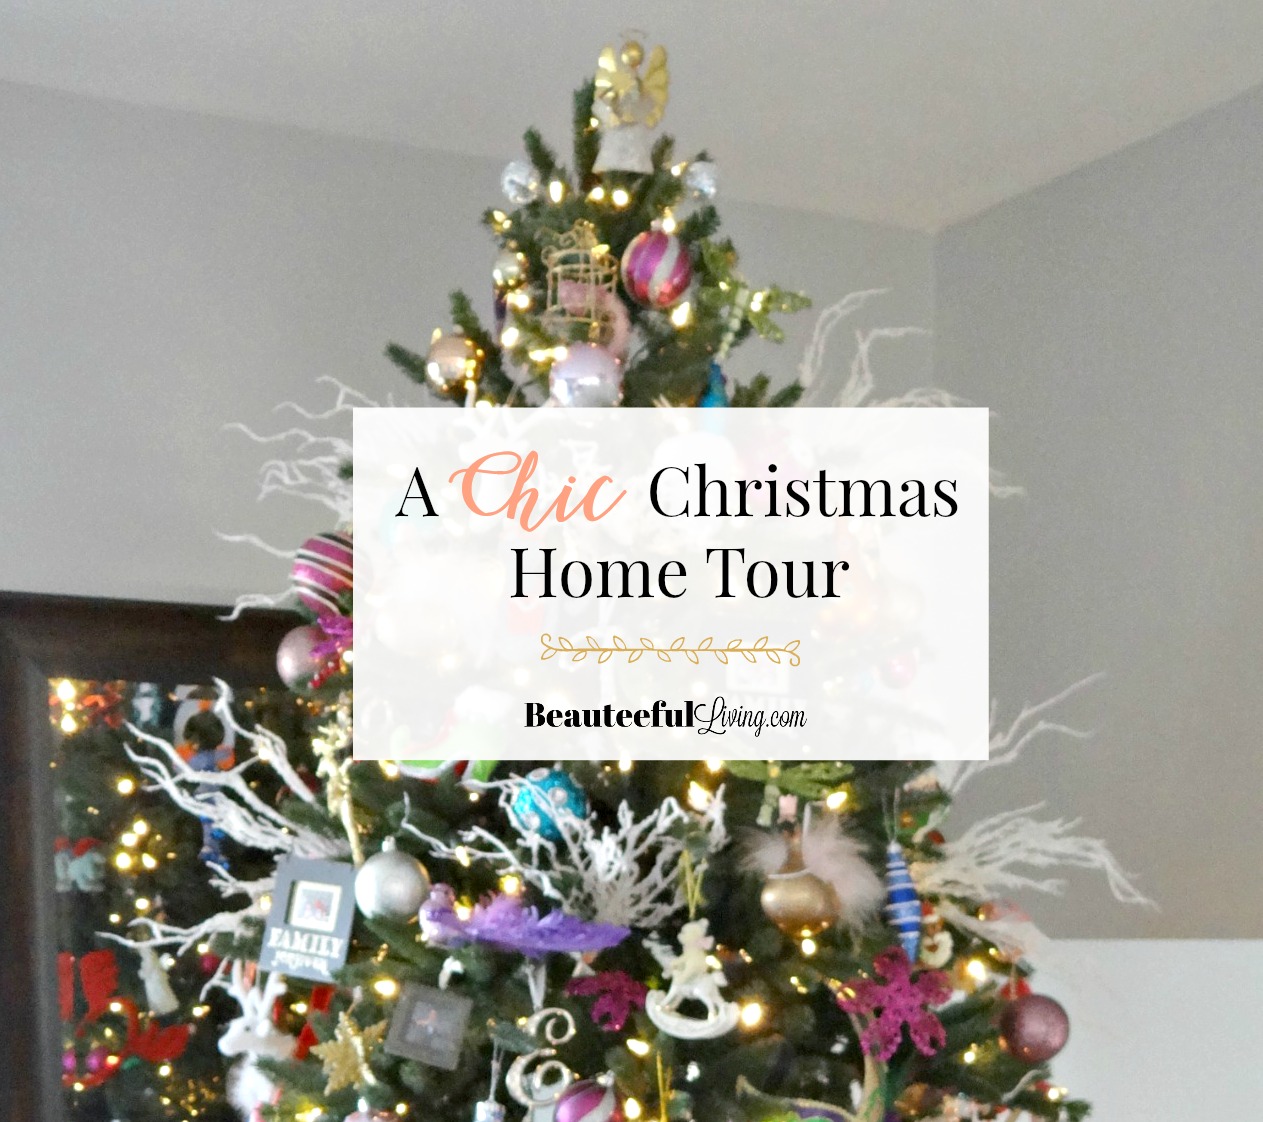 Chic Christmas Home Tour - Beauteeful Living